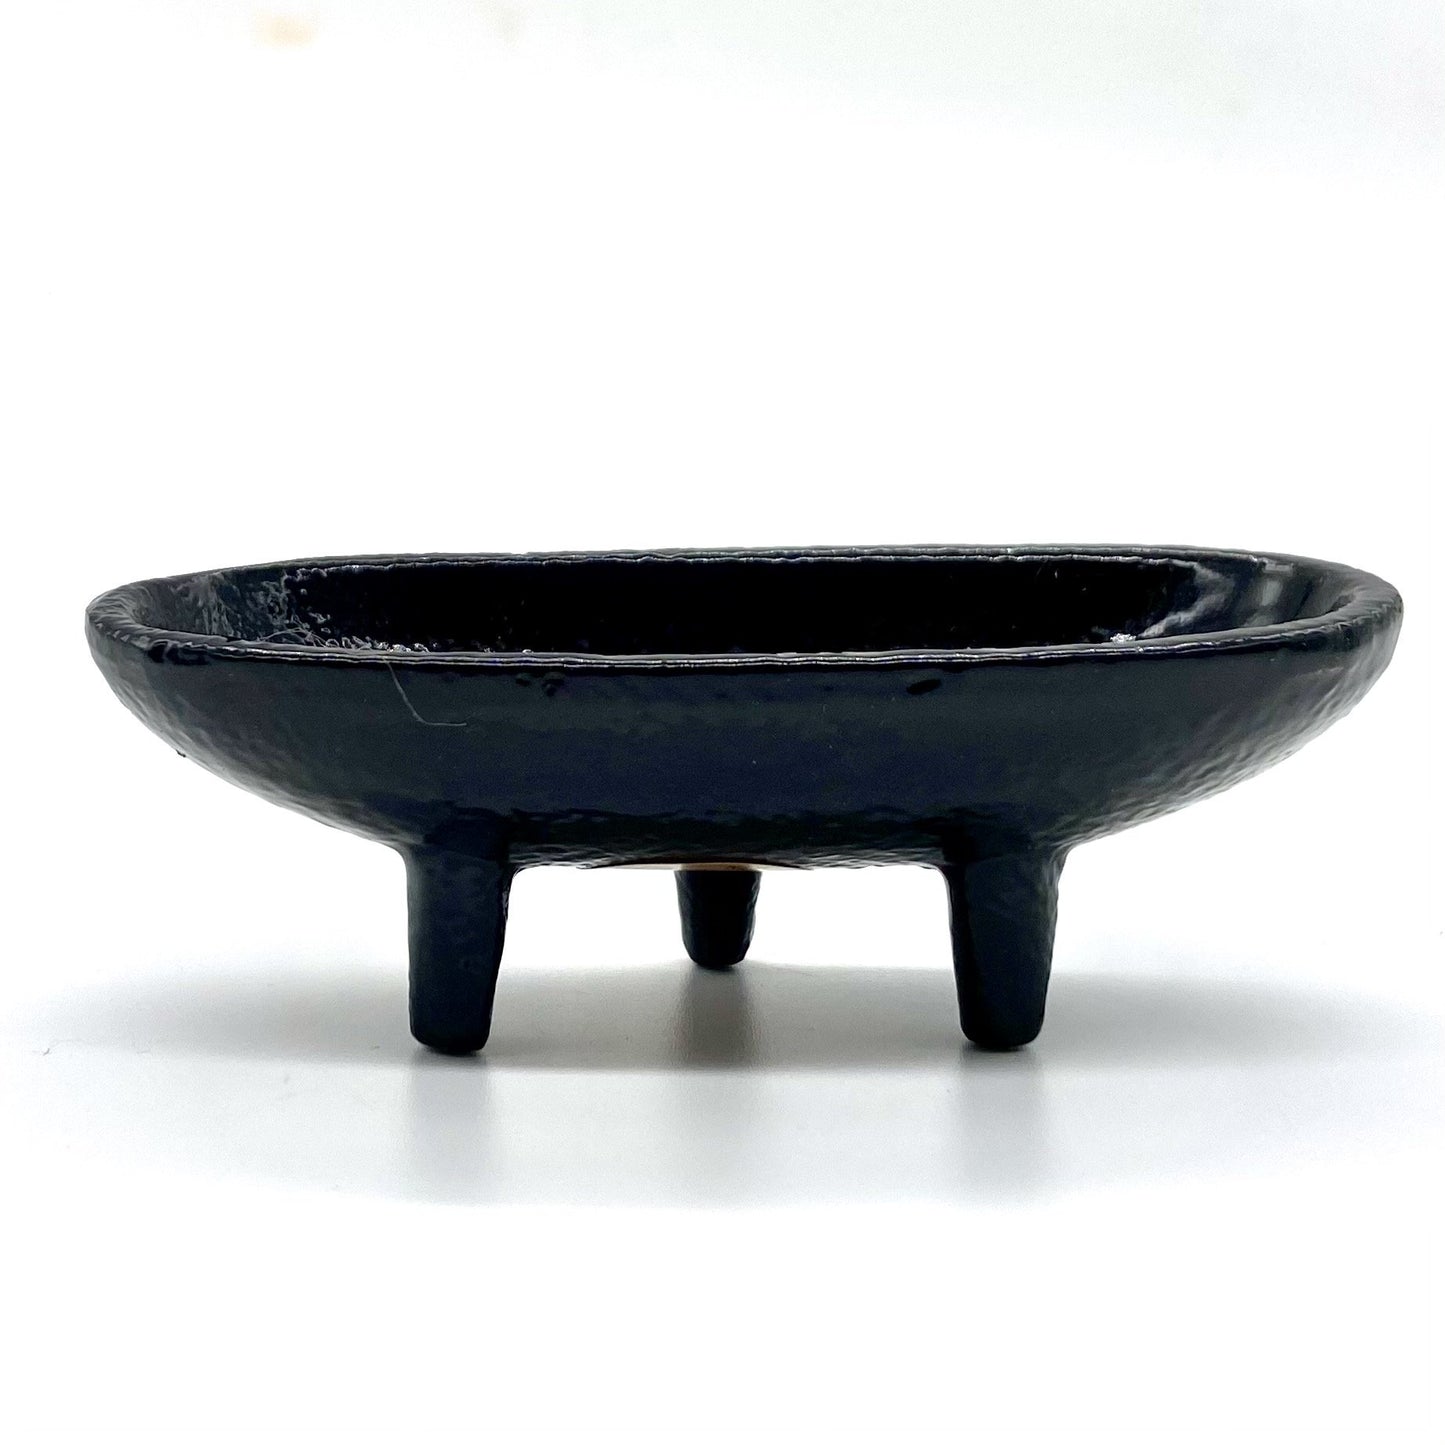 Cast iron incense burner in boat shape with legs.